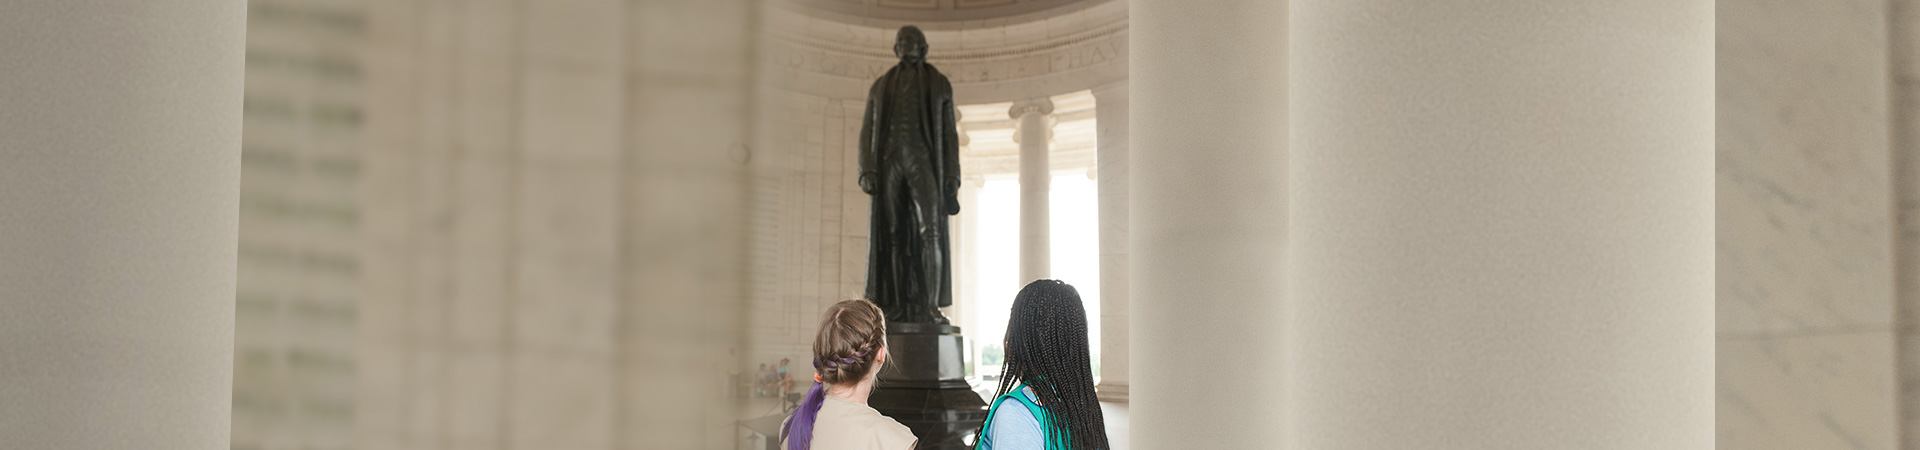  two girl scouts admiring a statue in washington dc 